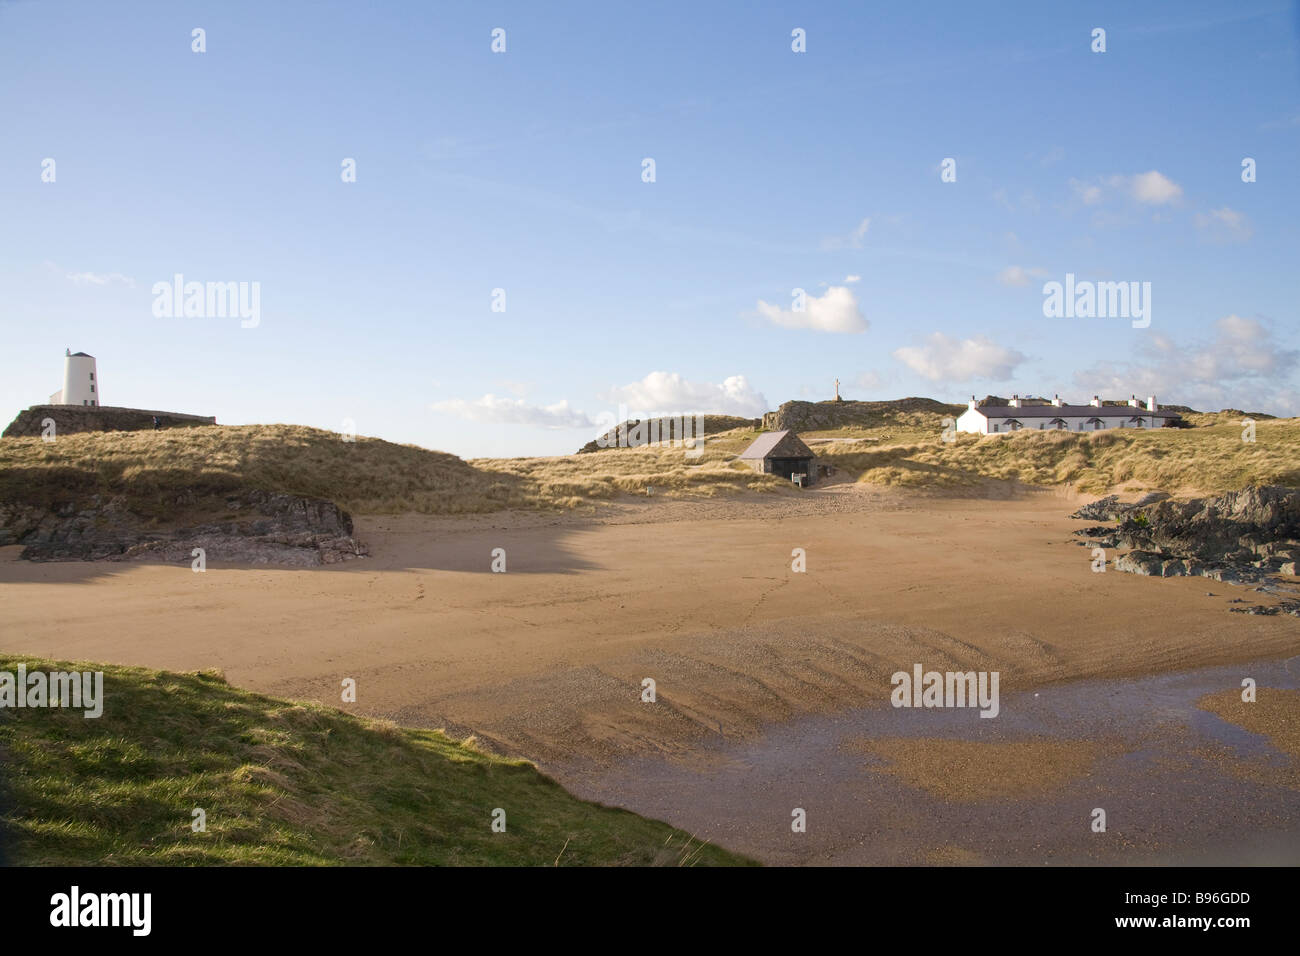 Llanddwyn Island Isle of Anglesey North Wales March Looking across to Twr Mawr lighthouse and the pilots cottages on this historic island Stock Photo